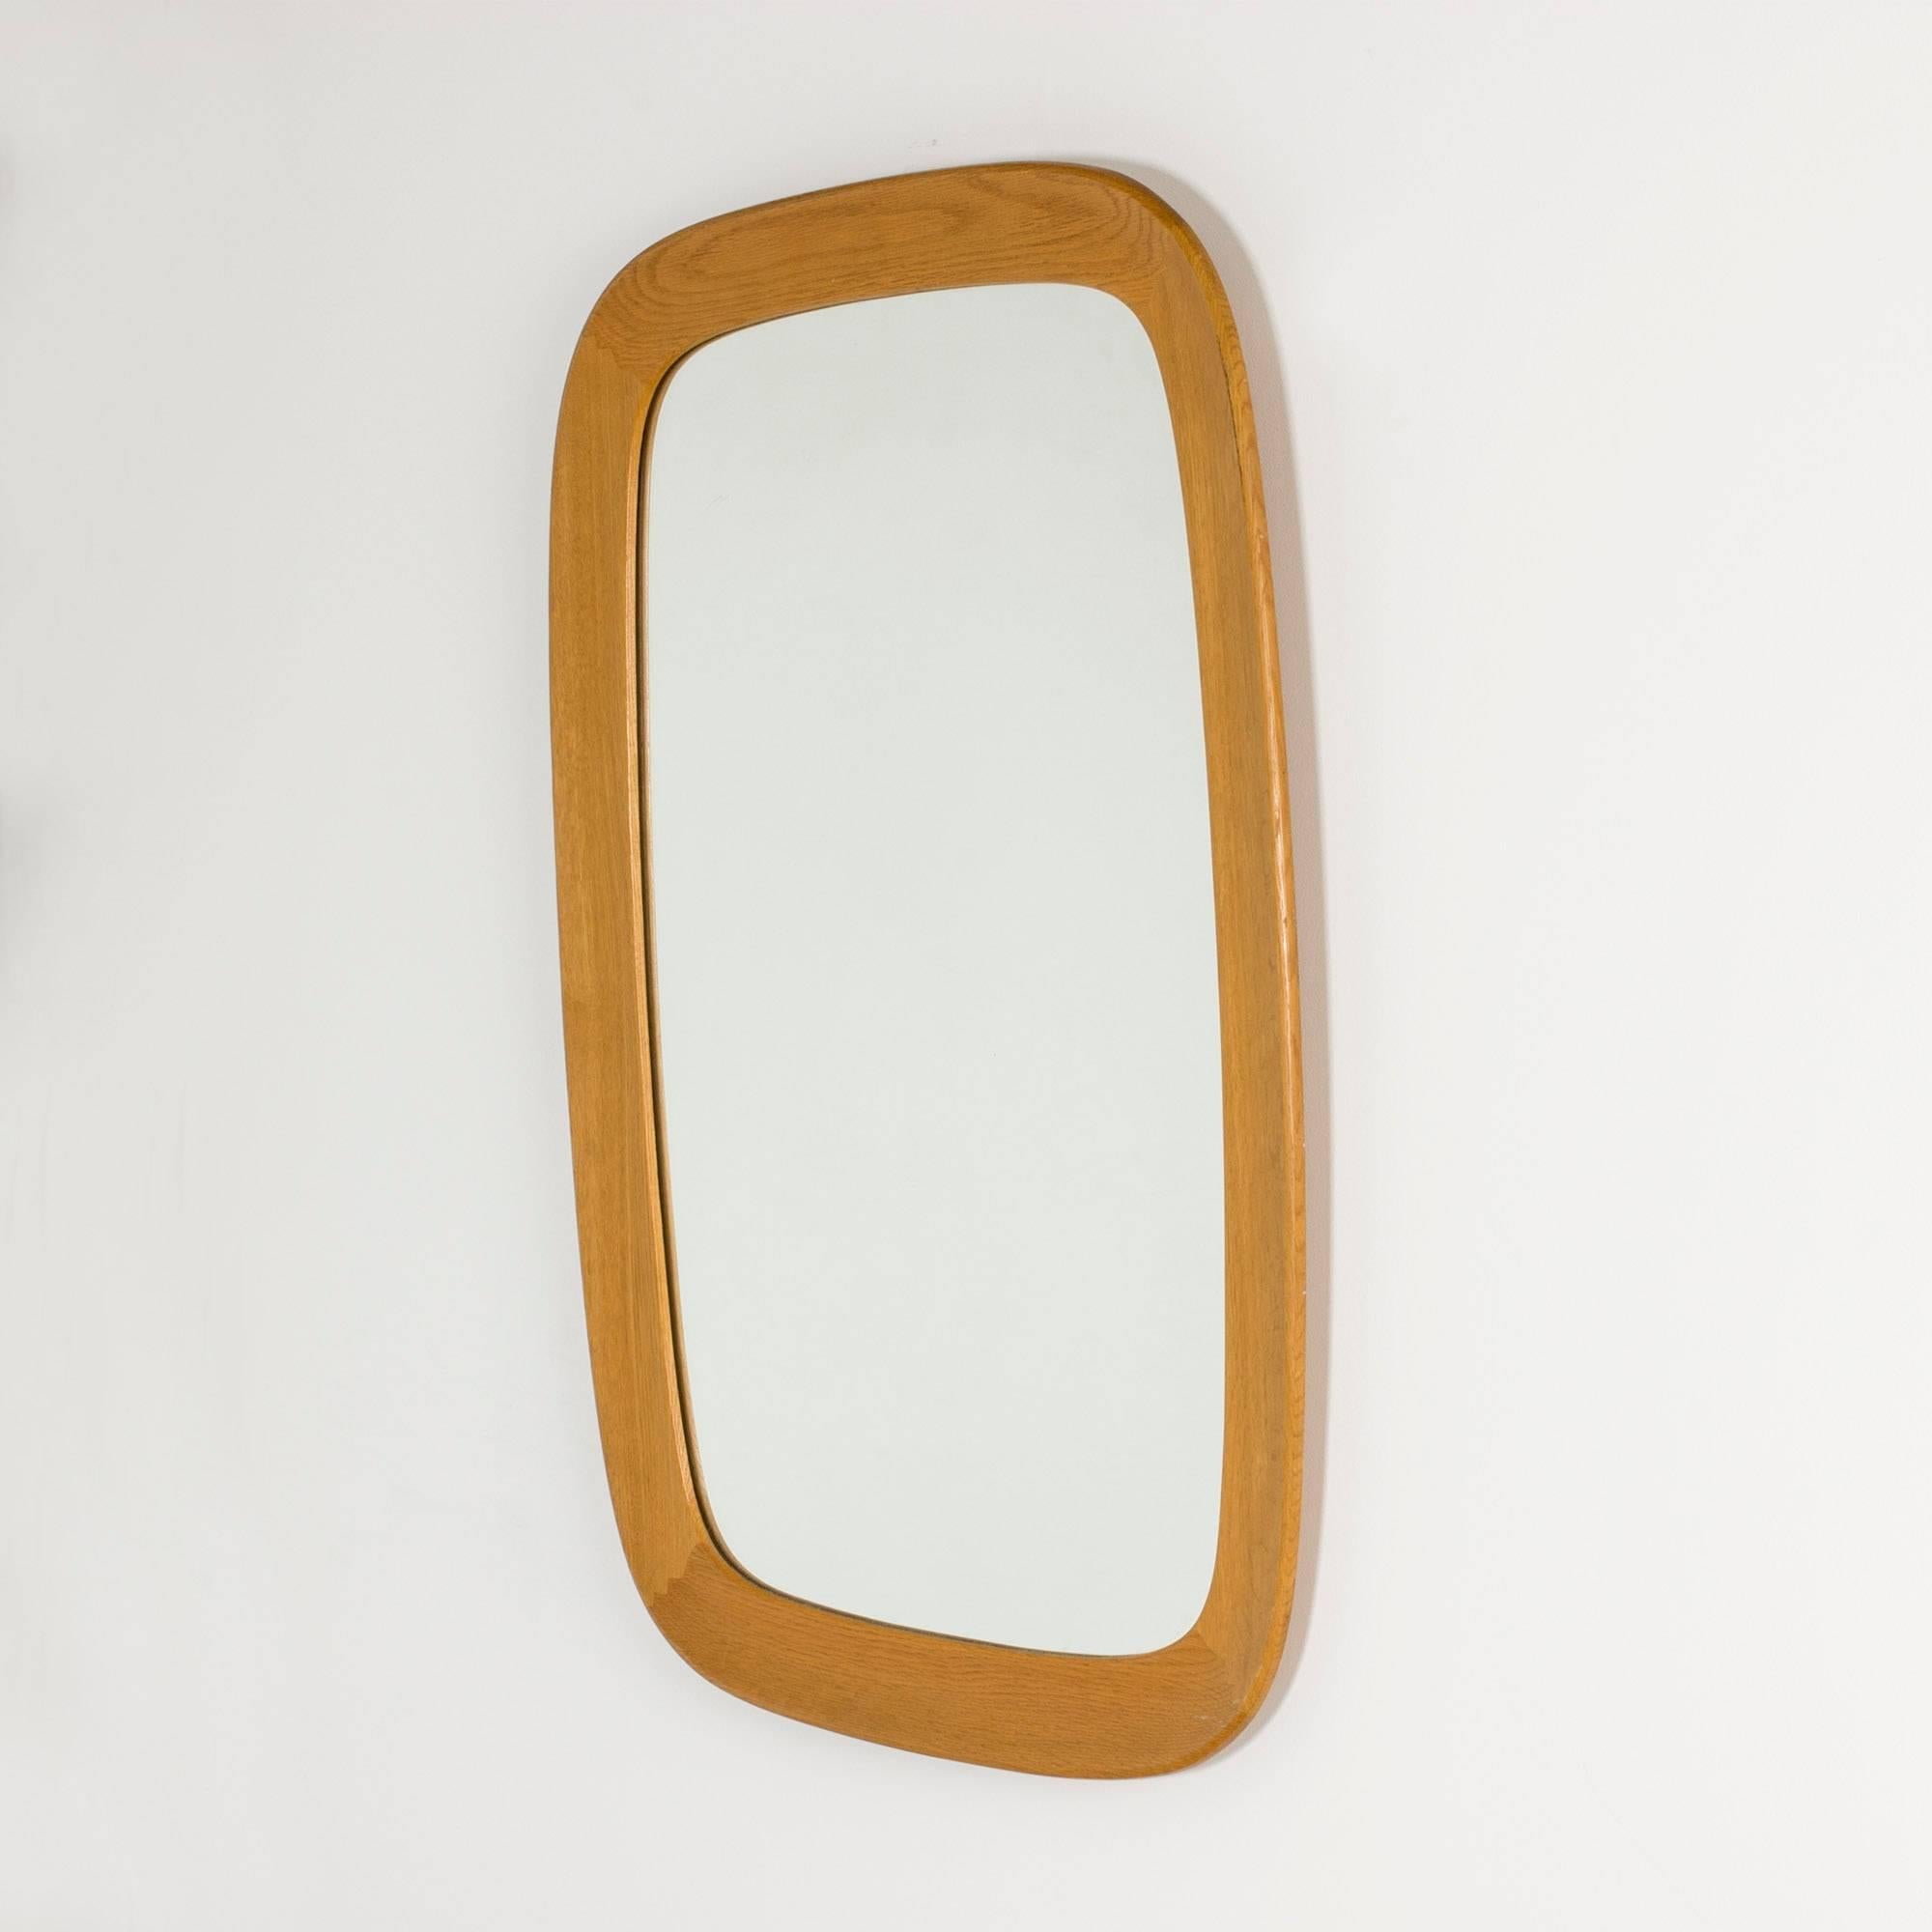 Large oak wall mirror from Fröseke, with rounded corners. Slightly concave design of the frame, nice zigzag joinery.